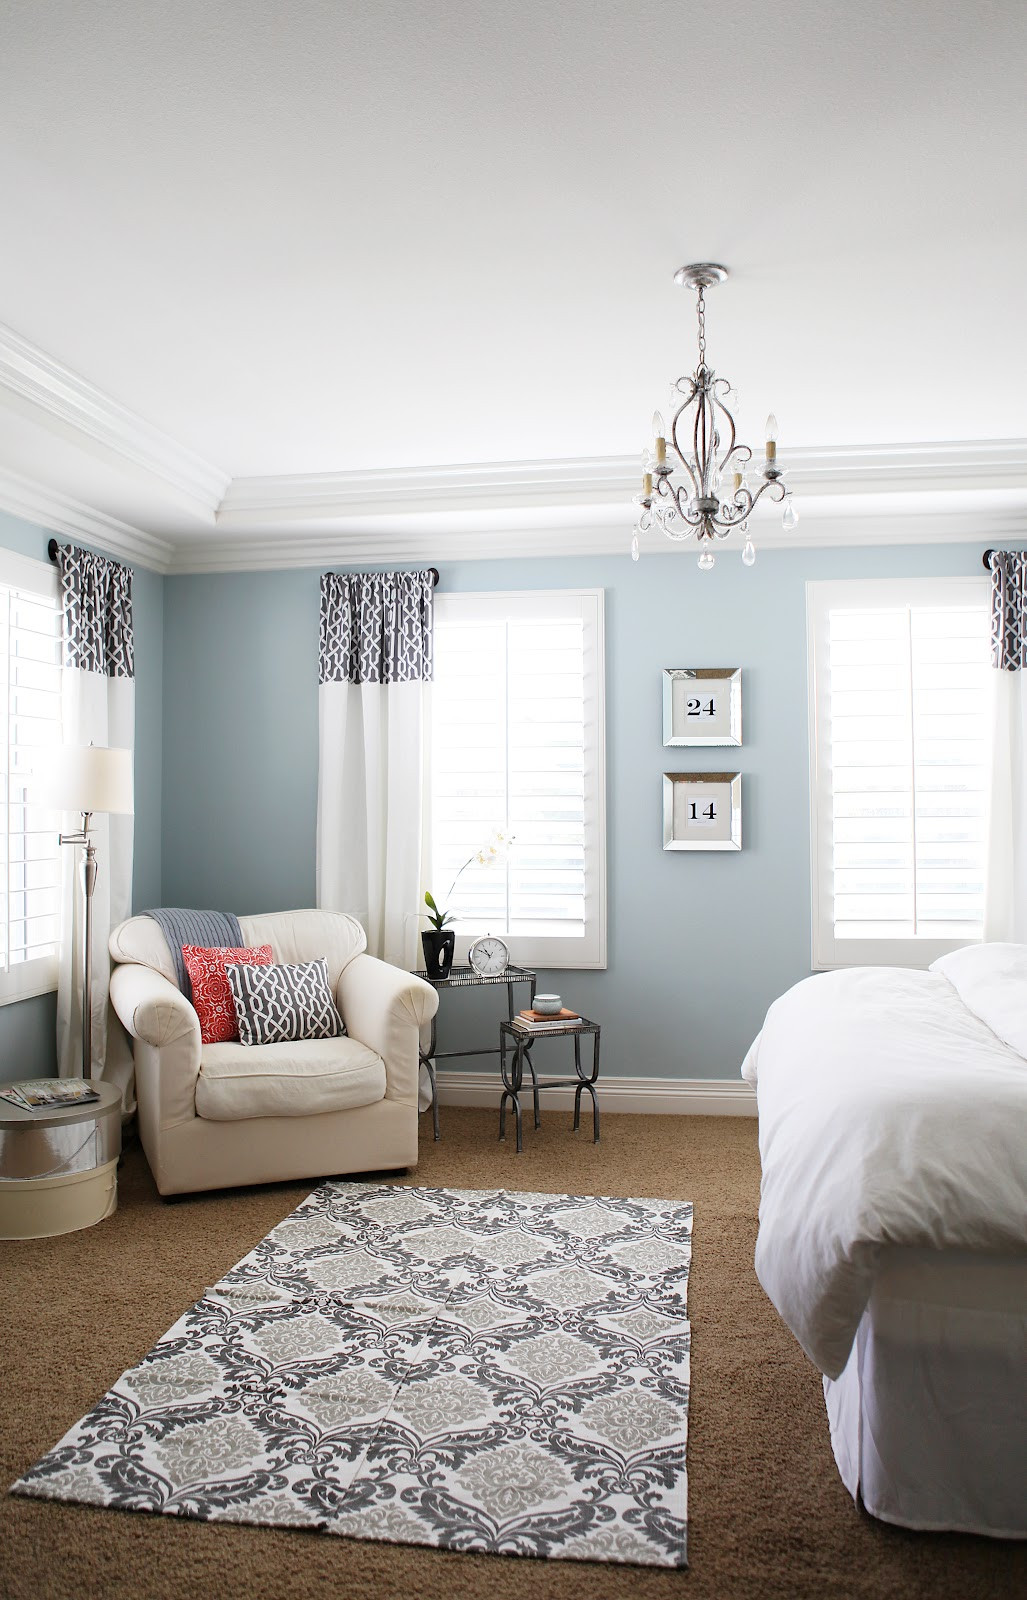 Master Bedroom Wall Colors
 sa stella Favorite Room Feature A Thoughtful Place